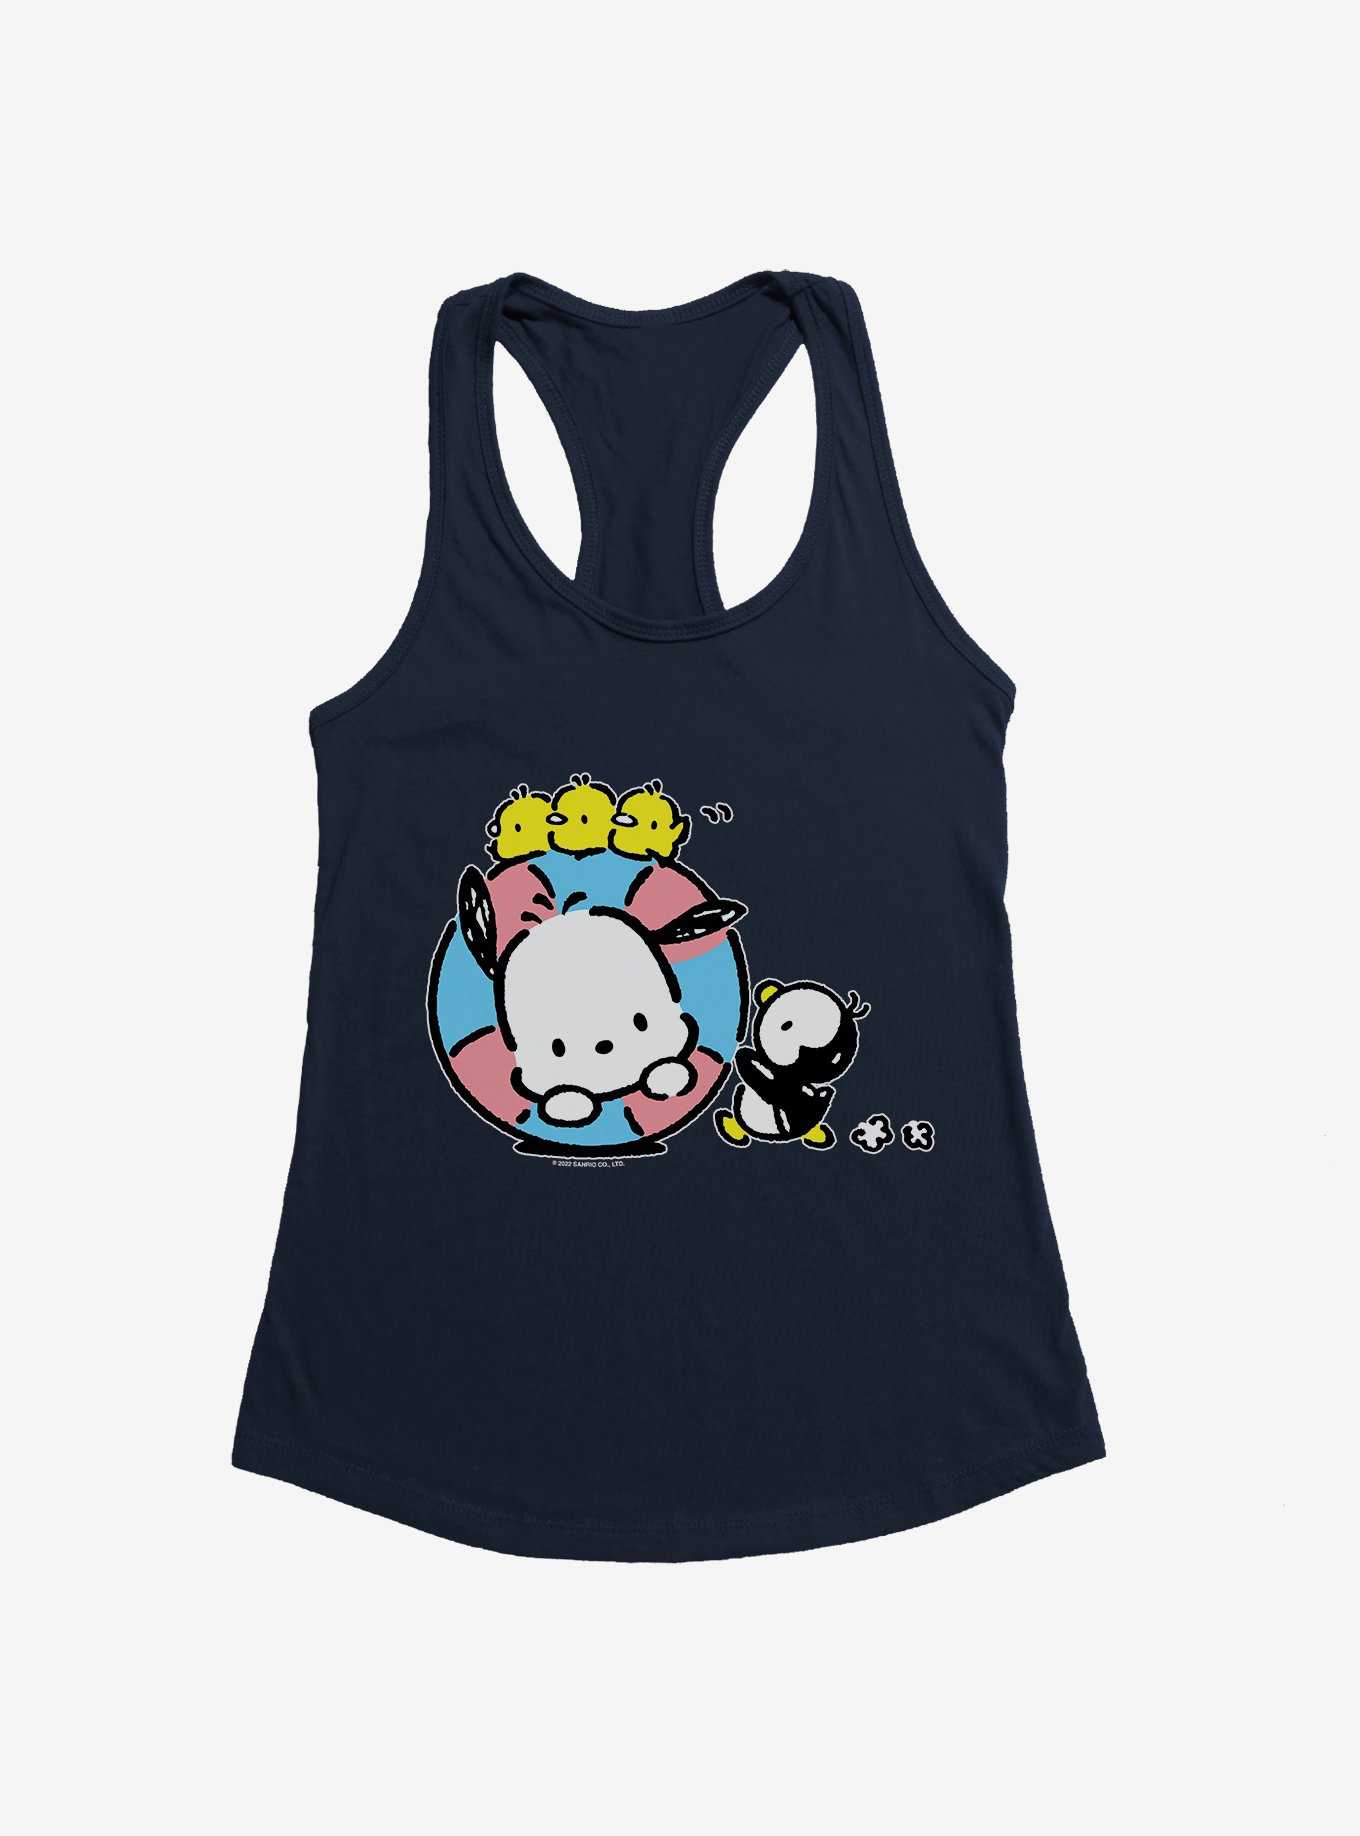 Pochacco Swimming With Friends Girls Tank, , hi-res